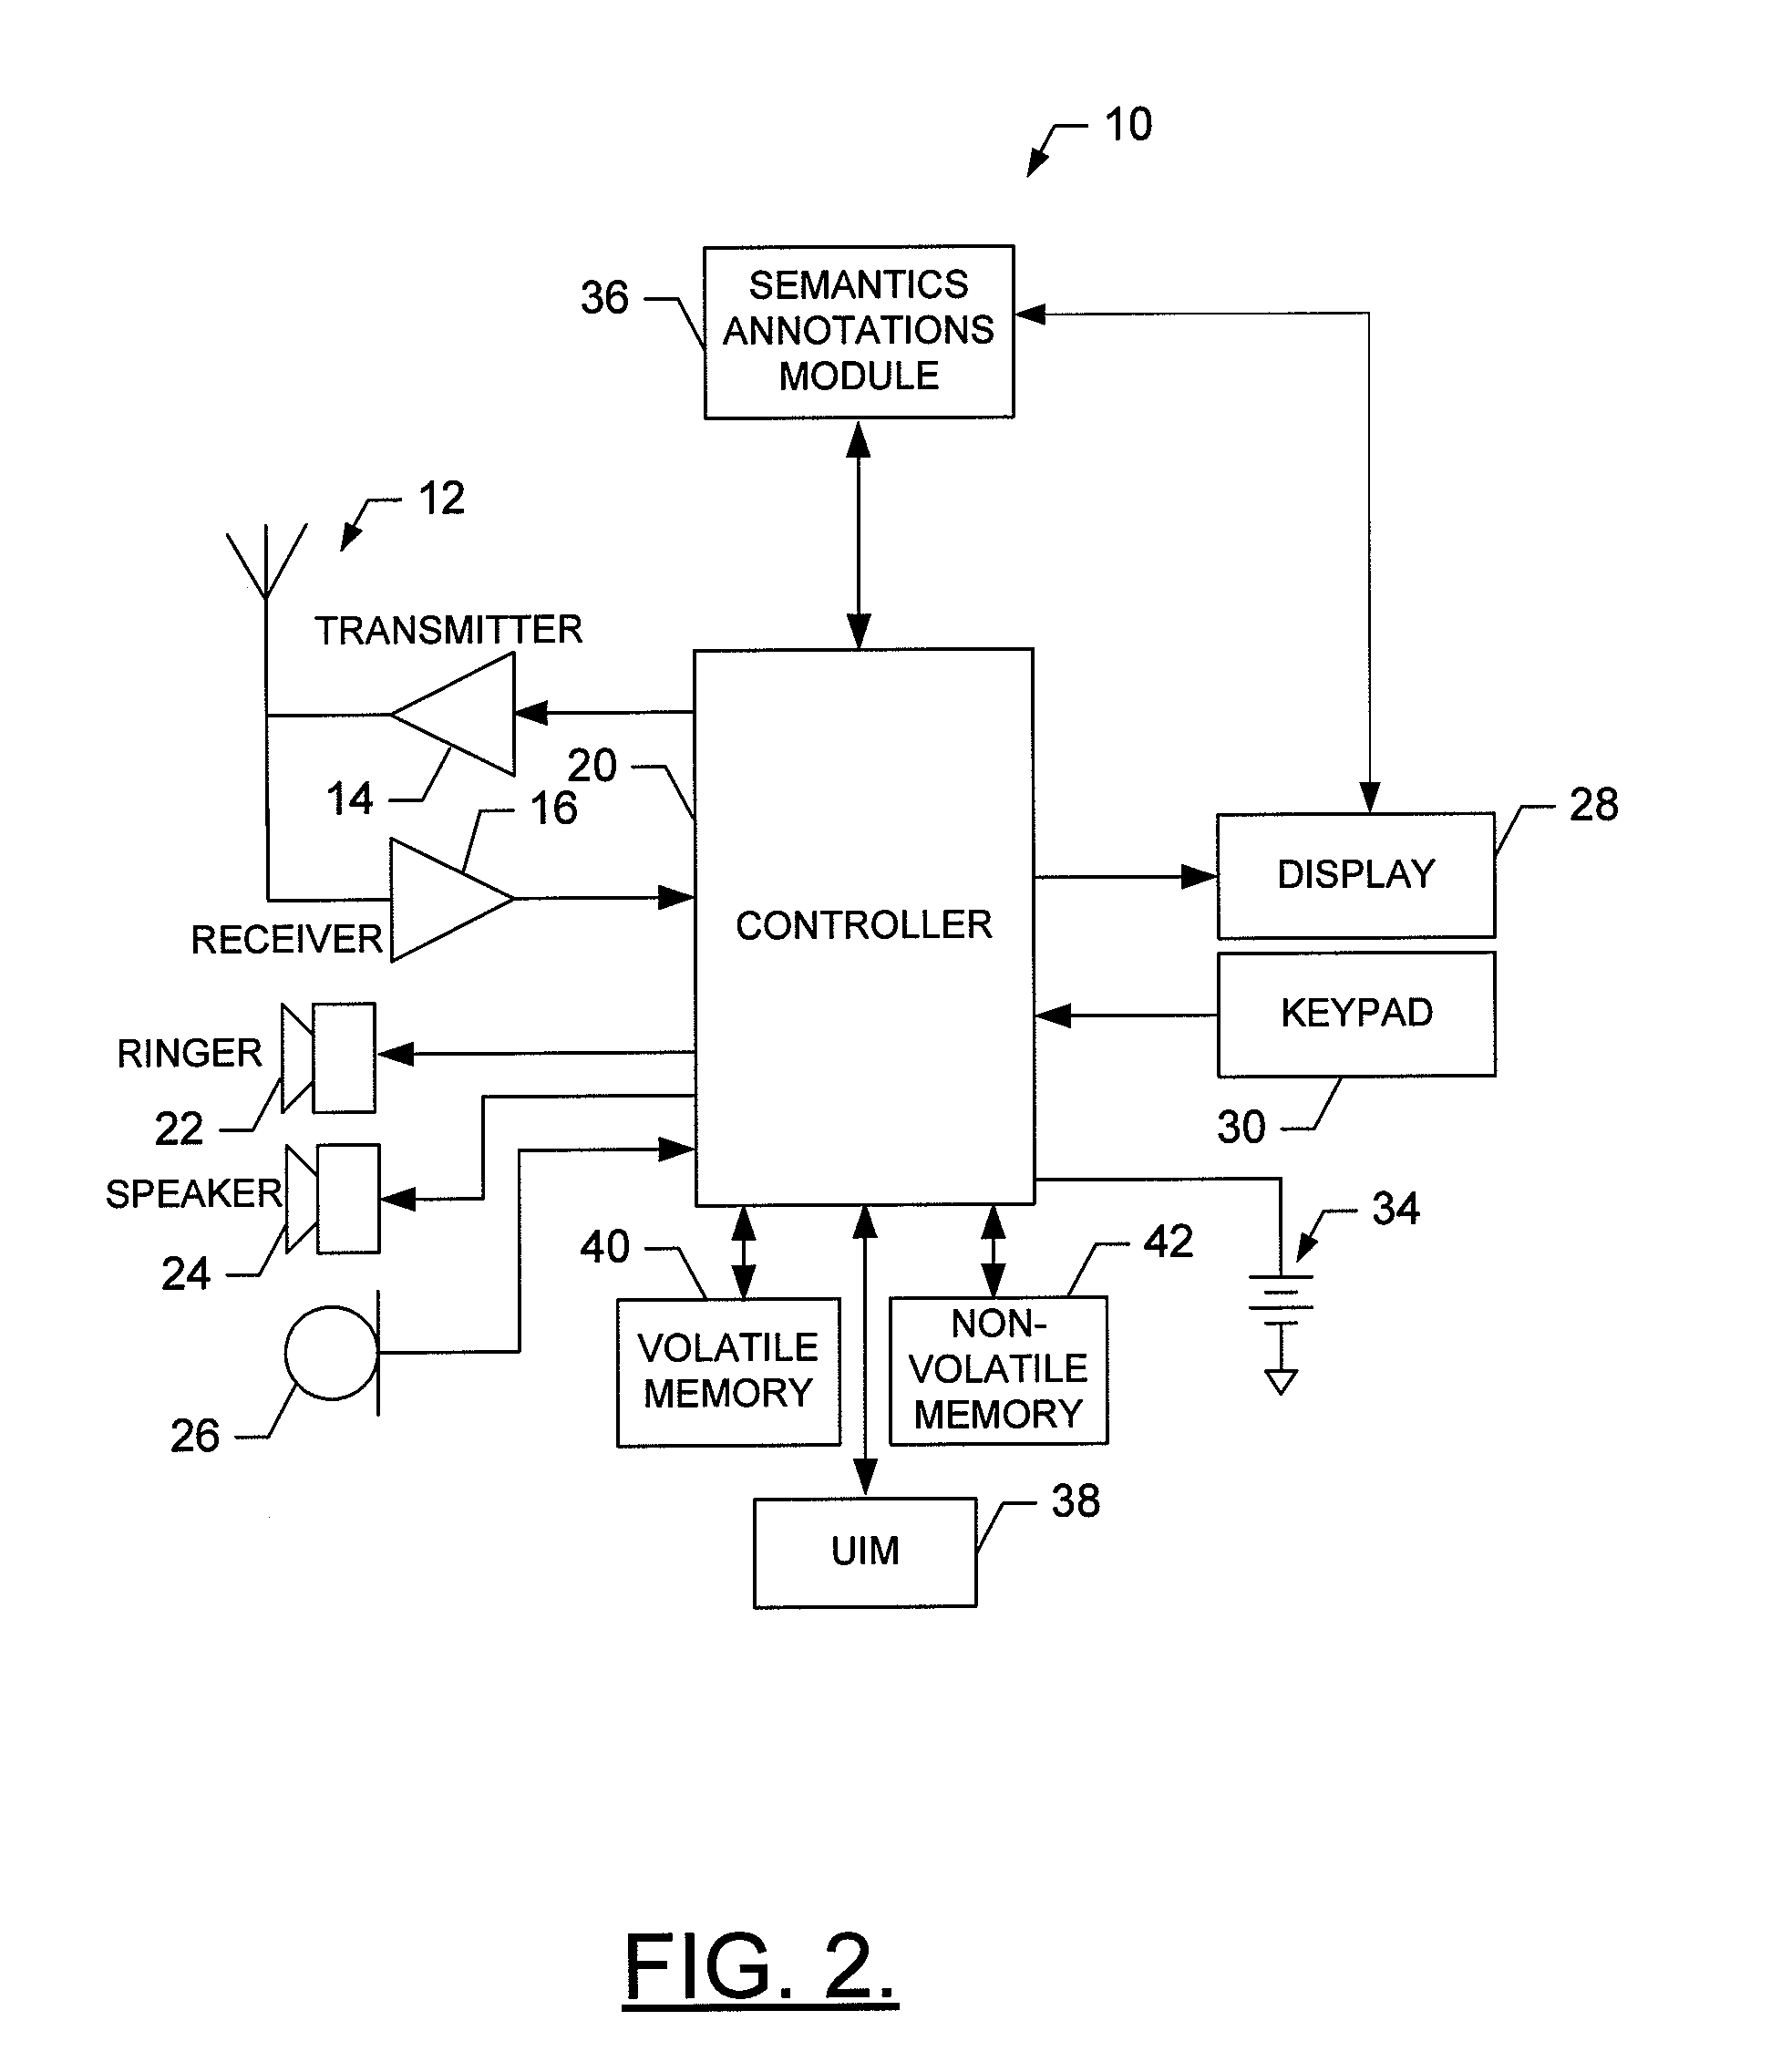 Method, apparatus and computer program product for making semantic annotations for easy file organization and search